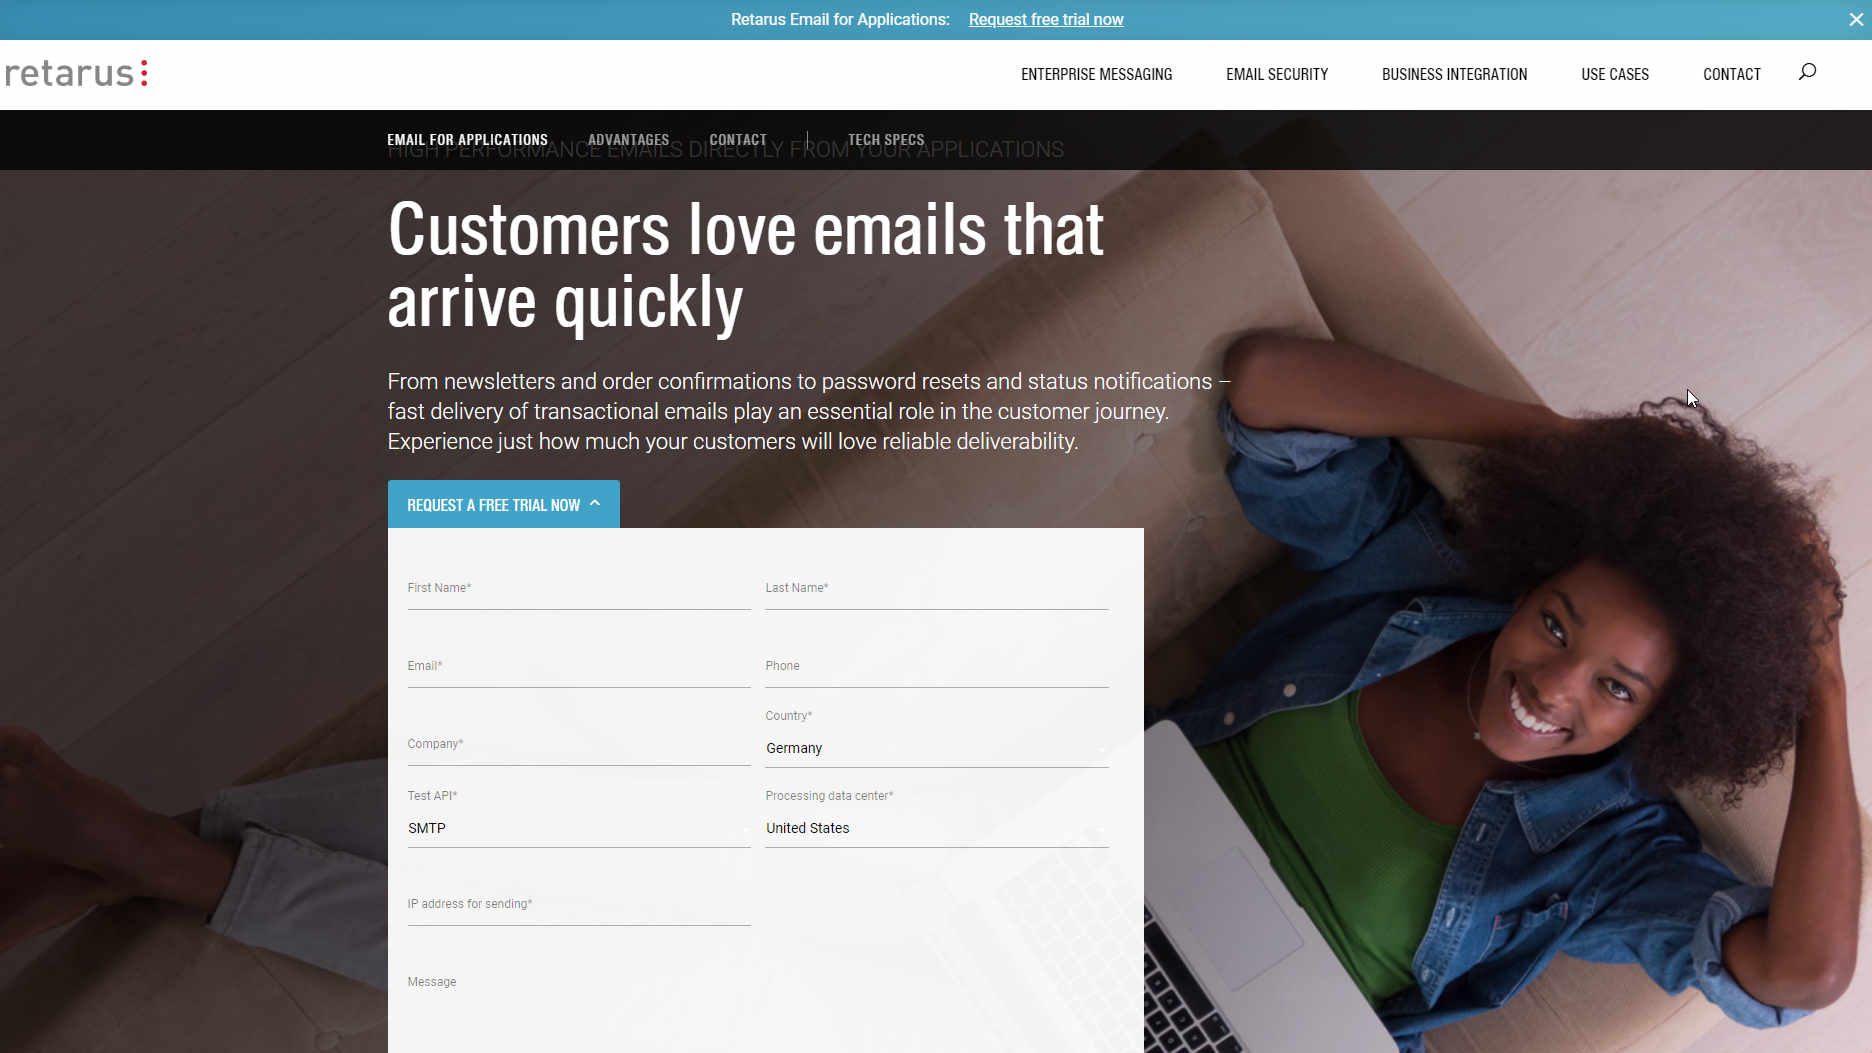 Email from applications: Try out Transactional Email free of charge